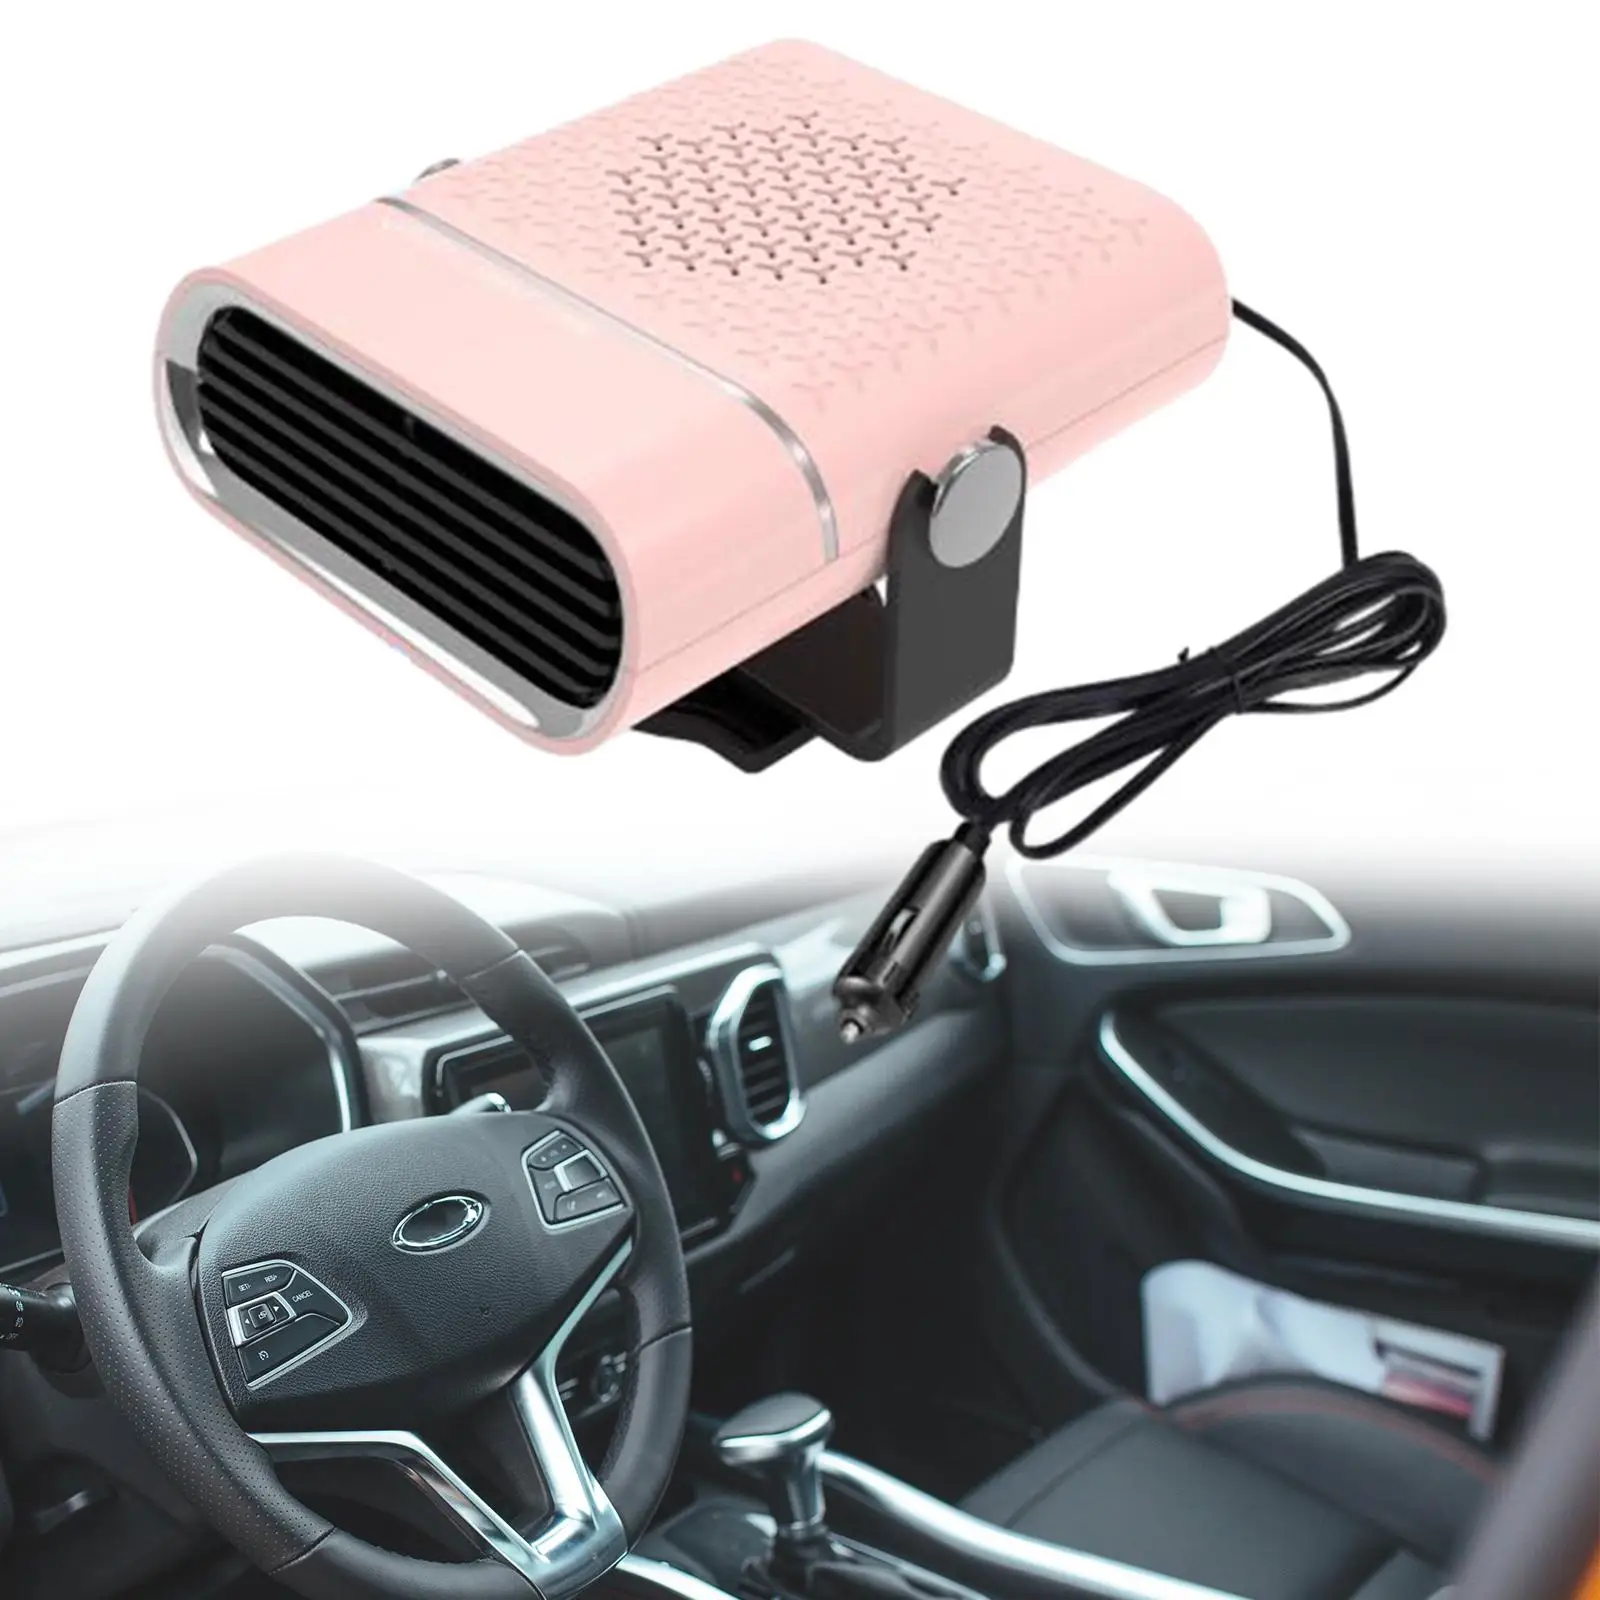 Car Heater 24V 2 in 1 Plug into Lighter 260W Auto Vehicle Heater